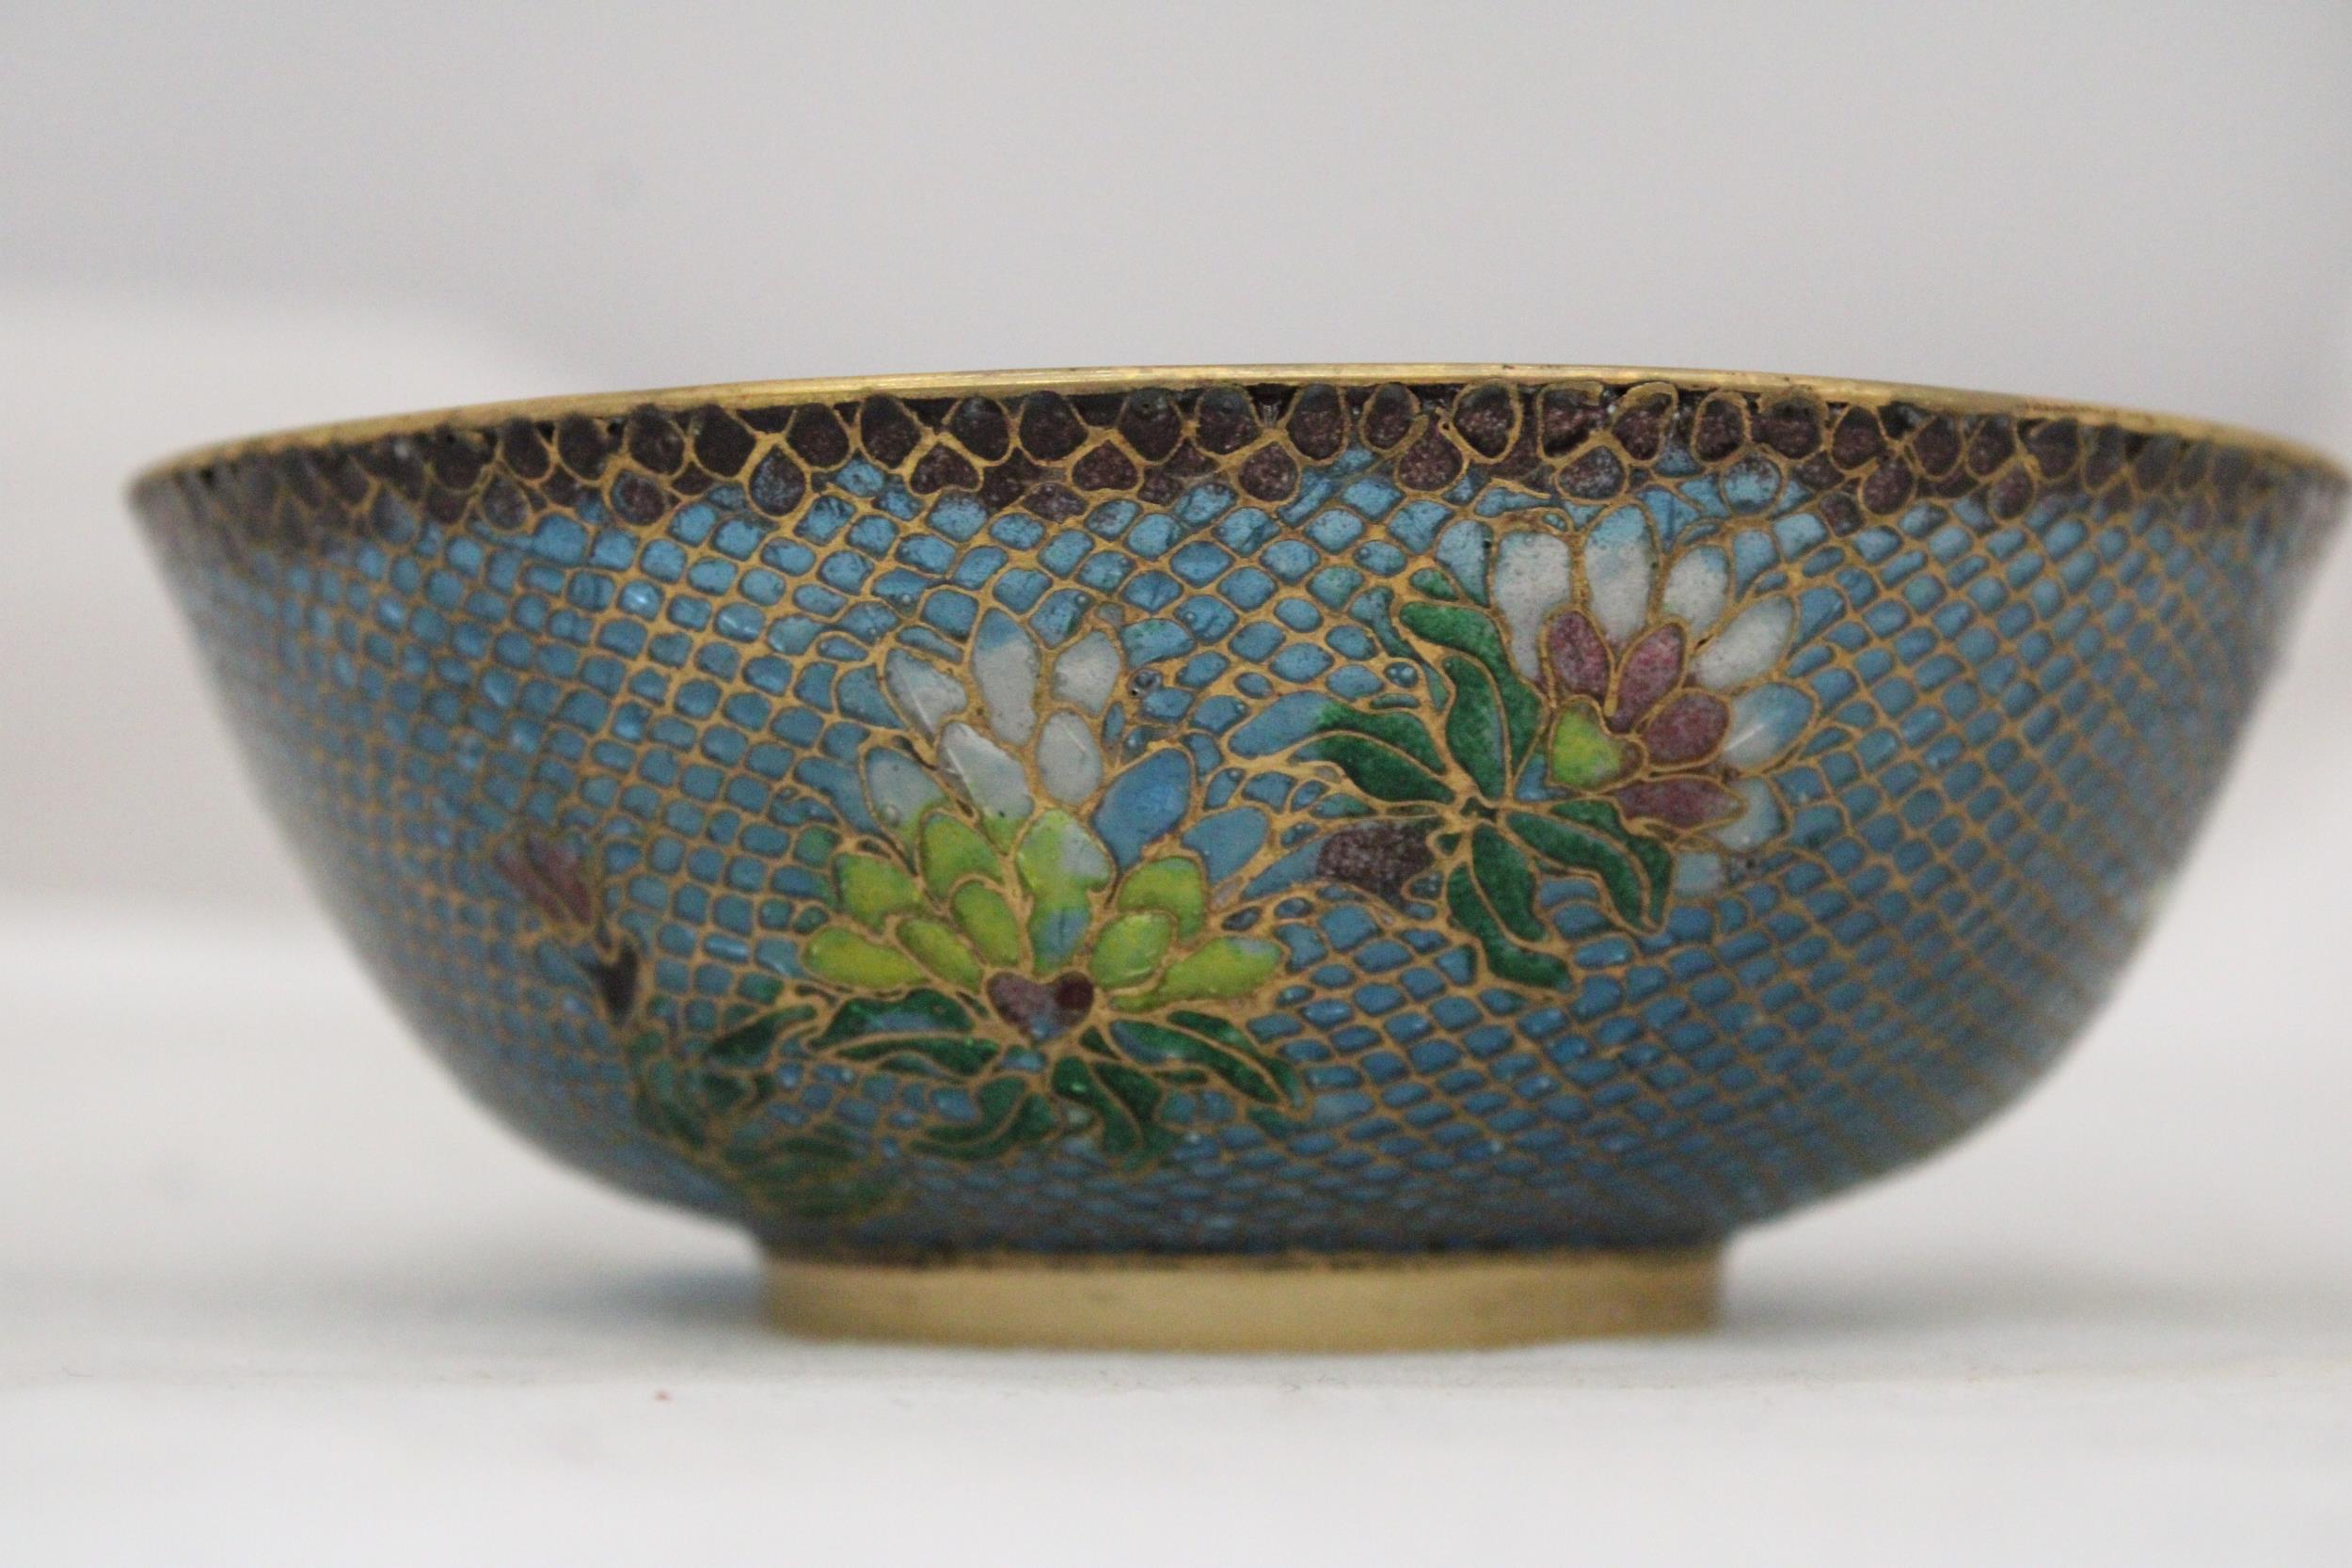 A VINTAGE CHINESE STYLE BRASS FILIGREE AND ENAMEL BOWL ON WOODEN STAND - Image 4 of 5